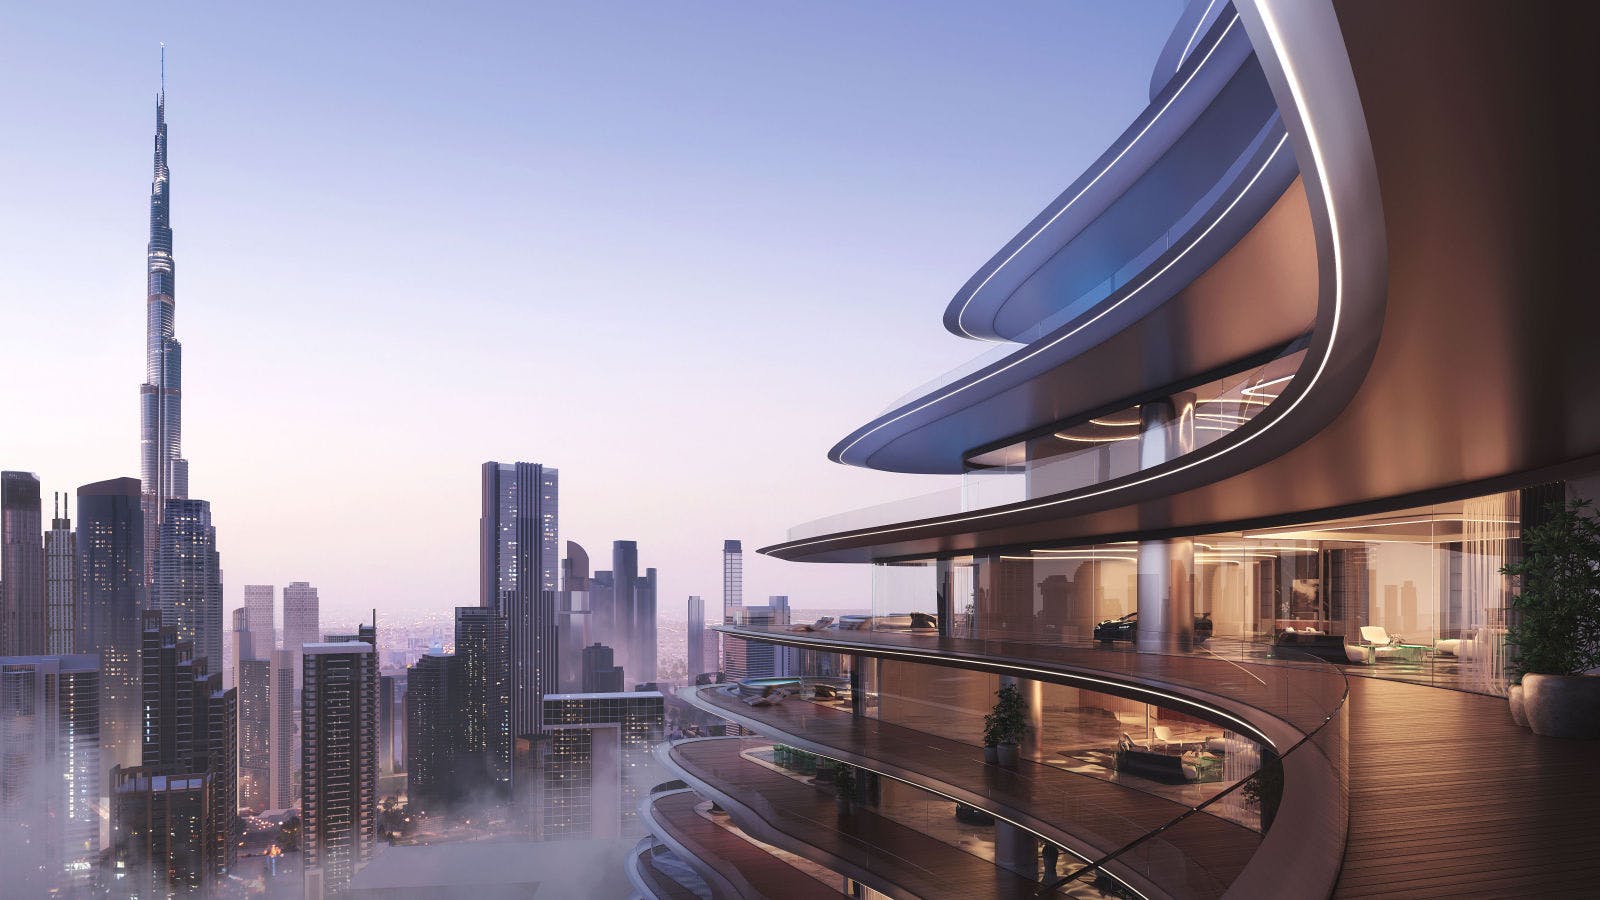 The Bugatti Residences by Binghatti project, located in the heart of Dubai, offers a spectacular view over the metropolis.